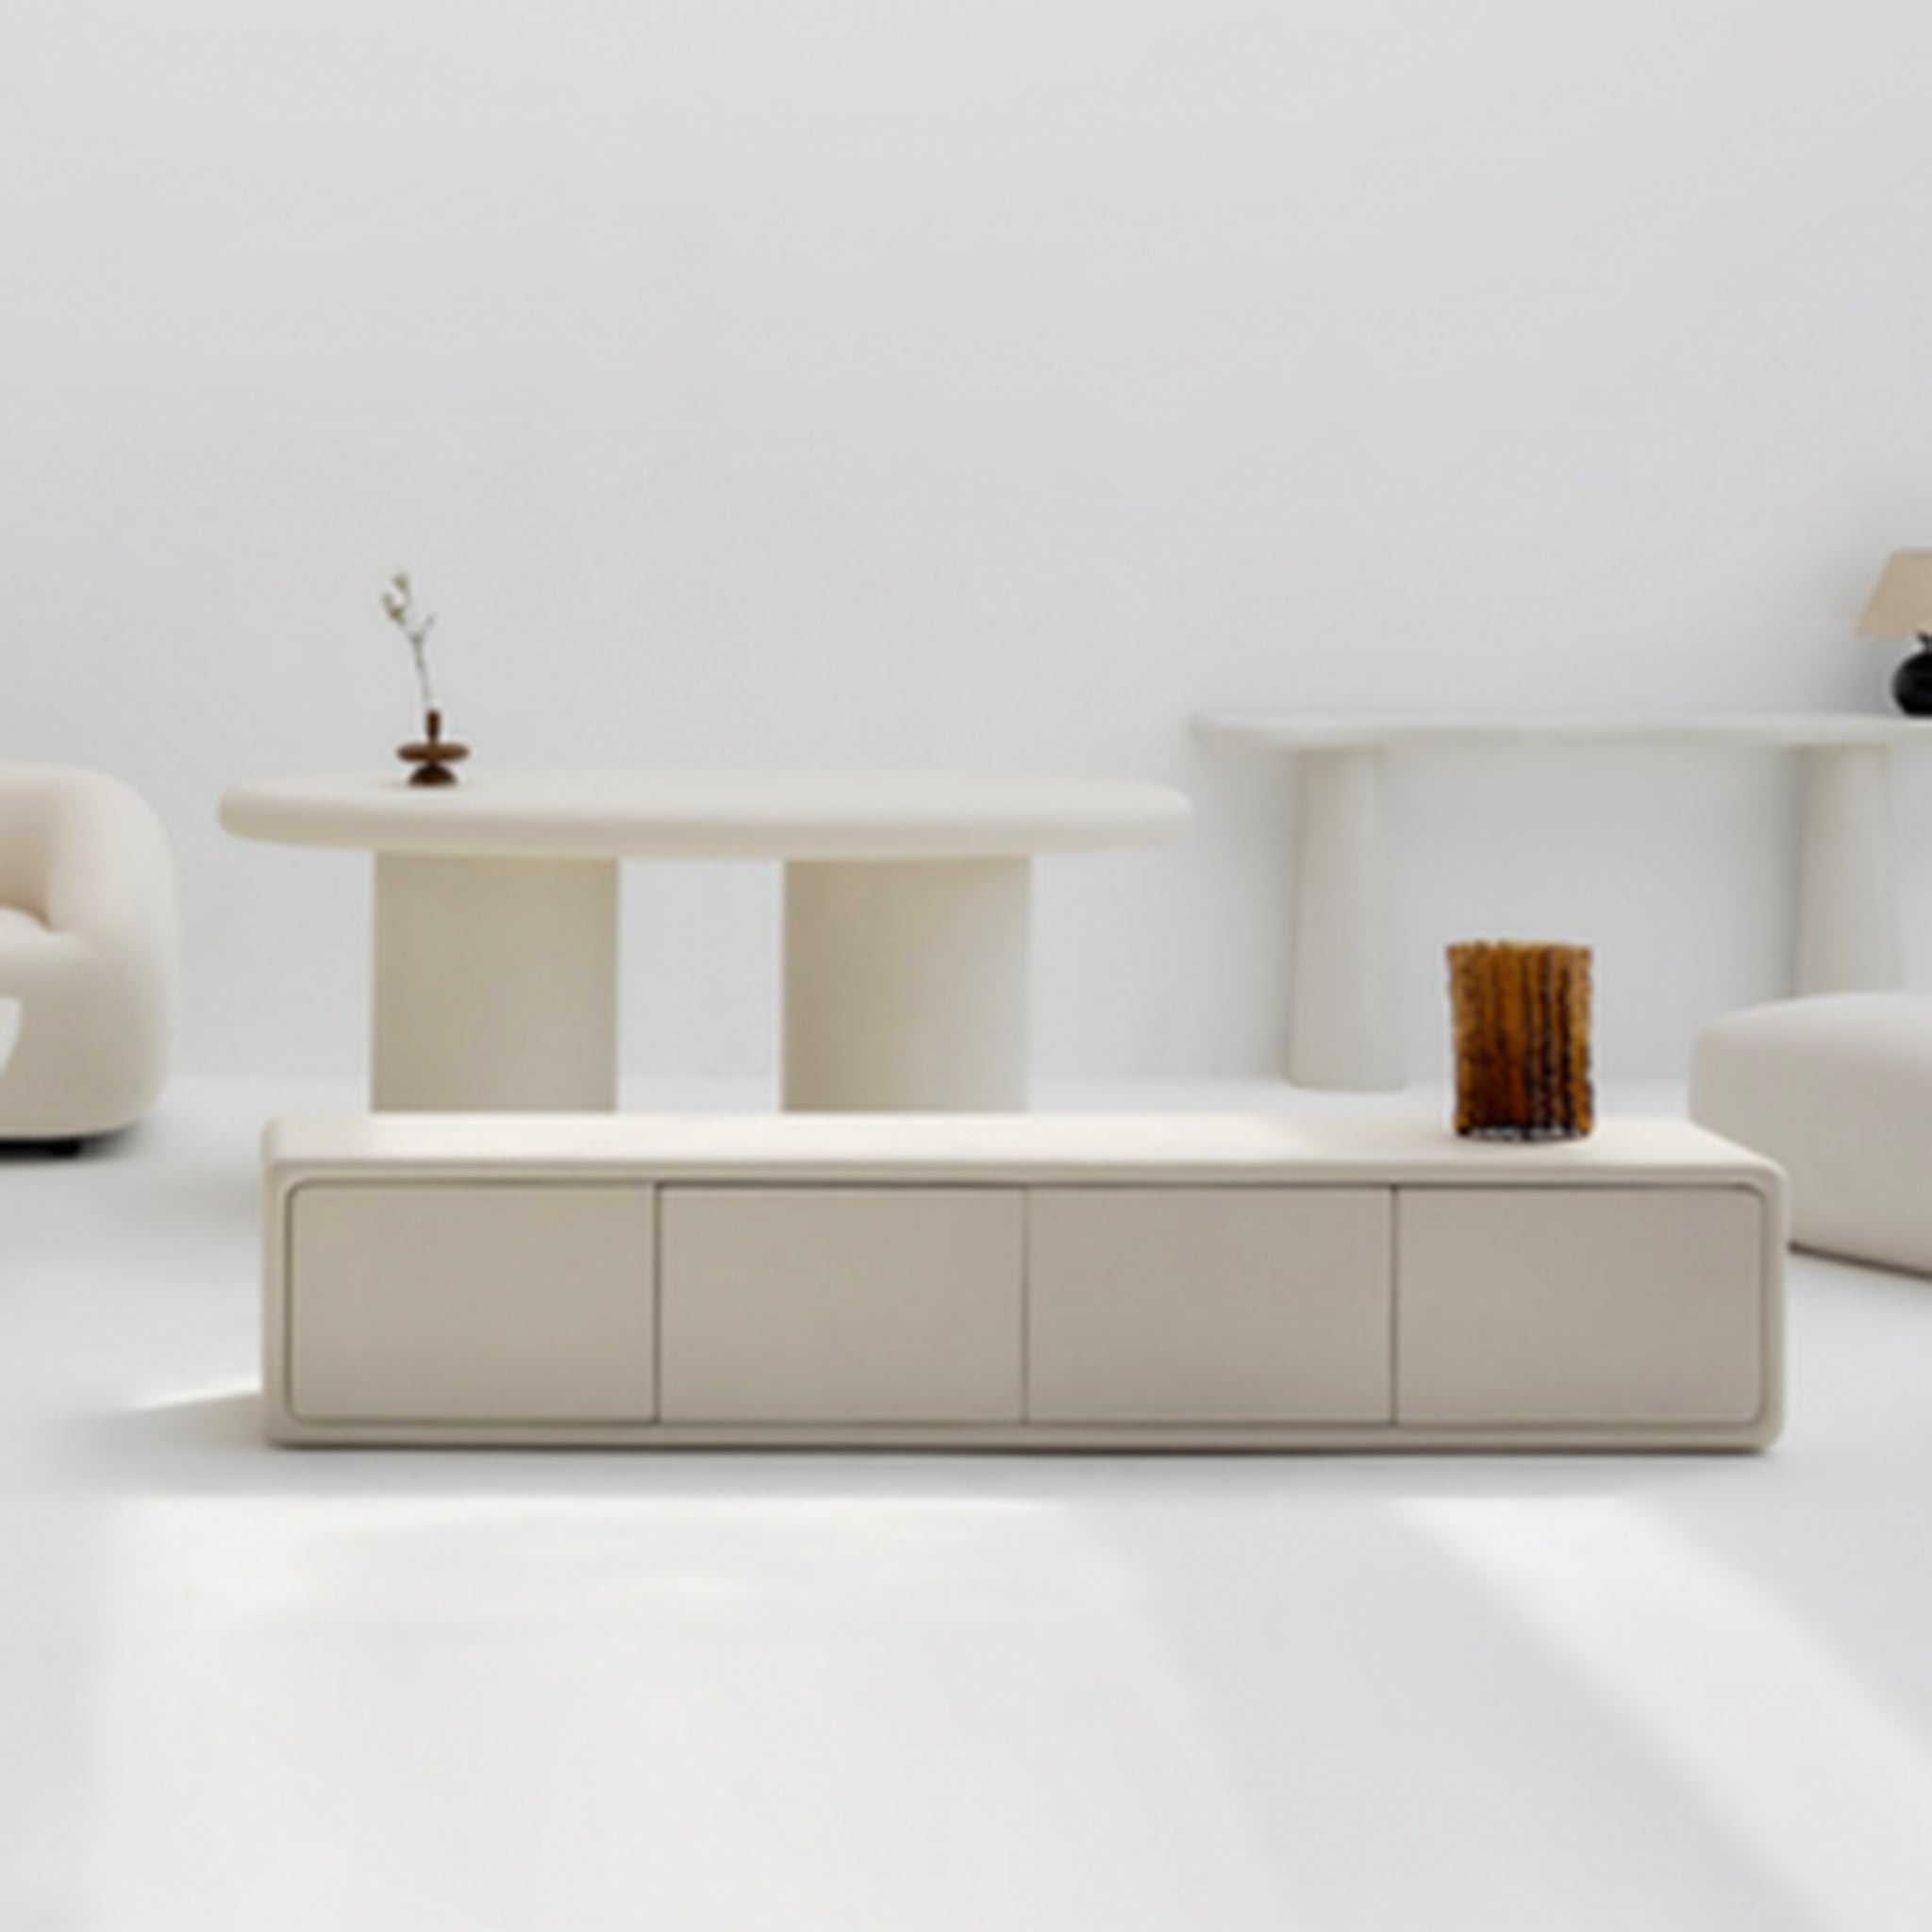 Japandi-inspired coffee table: The Noah Low Table in ashwood and Crema marble.